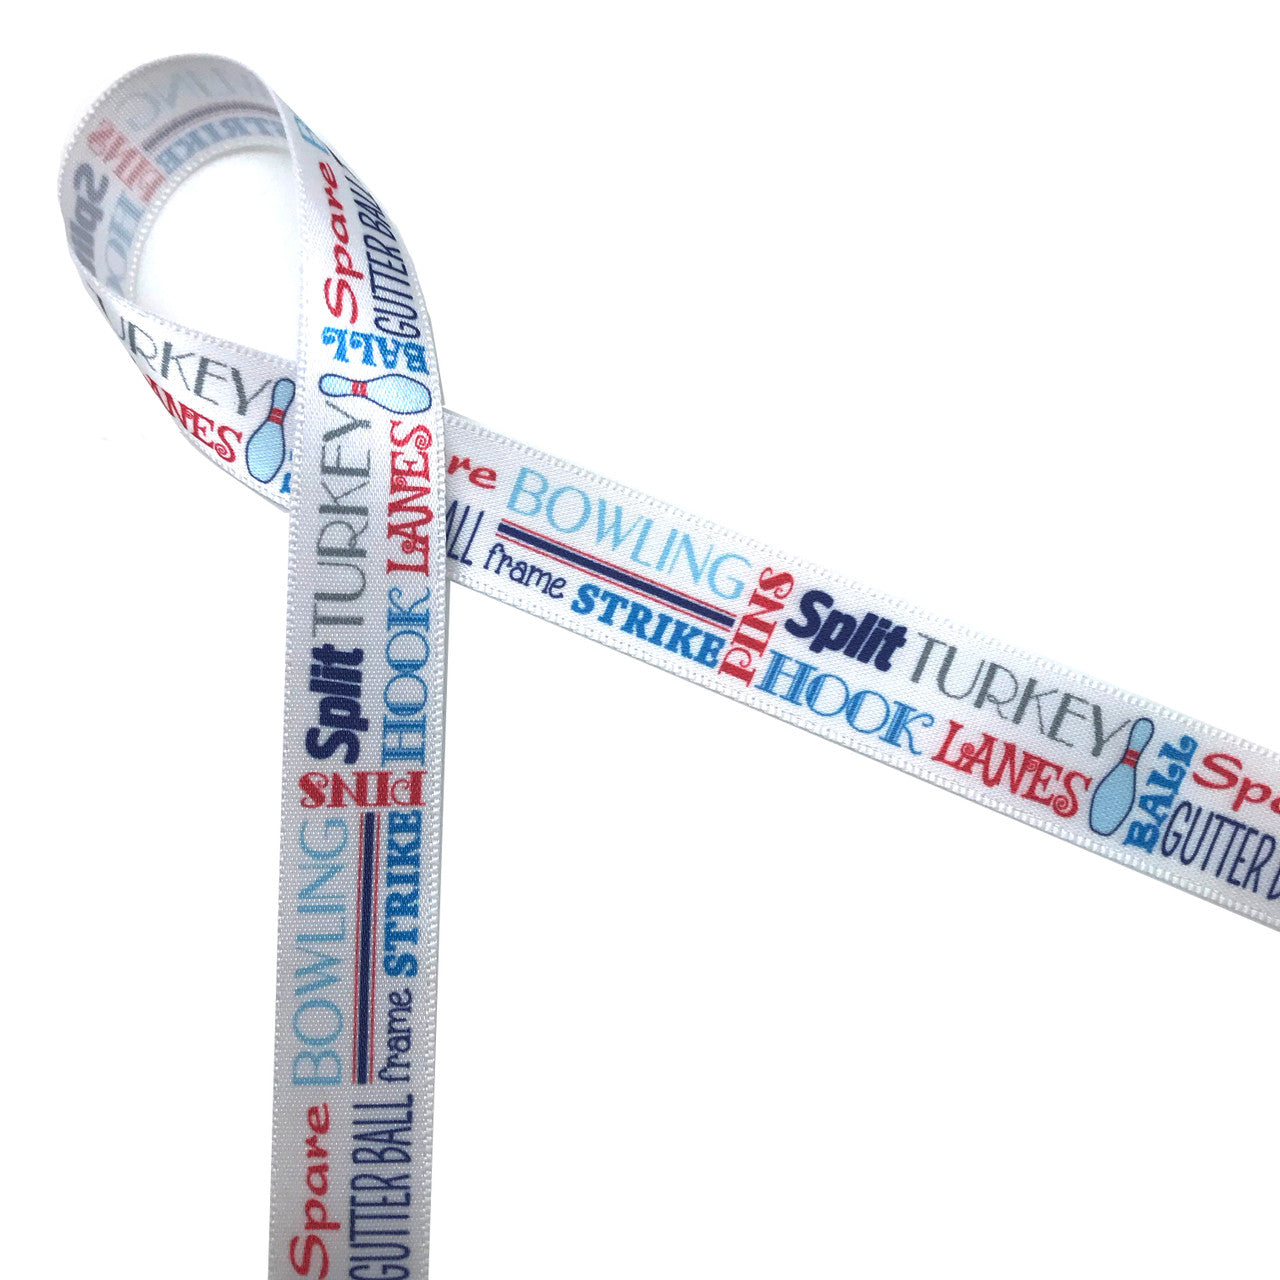 Bowling word block ribbon features all the terms associated with the sport printed in blue, red and gray on 5/8" white single face satin ribbon on 10 yard spools. This is a fun ribbon for parties, birthdays, gift wrap and gift baskets. Use this ribbon on sports themed wreaths, craft projects and quilts. All our ribbon is designed and printed in the SUA